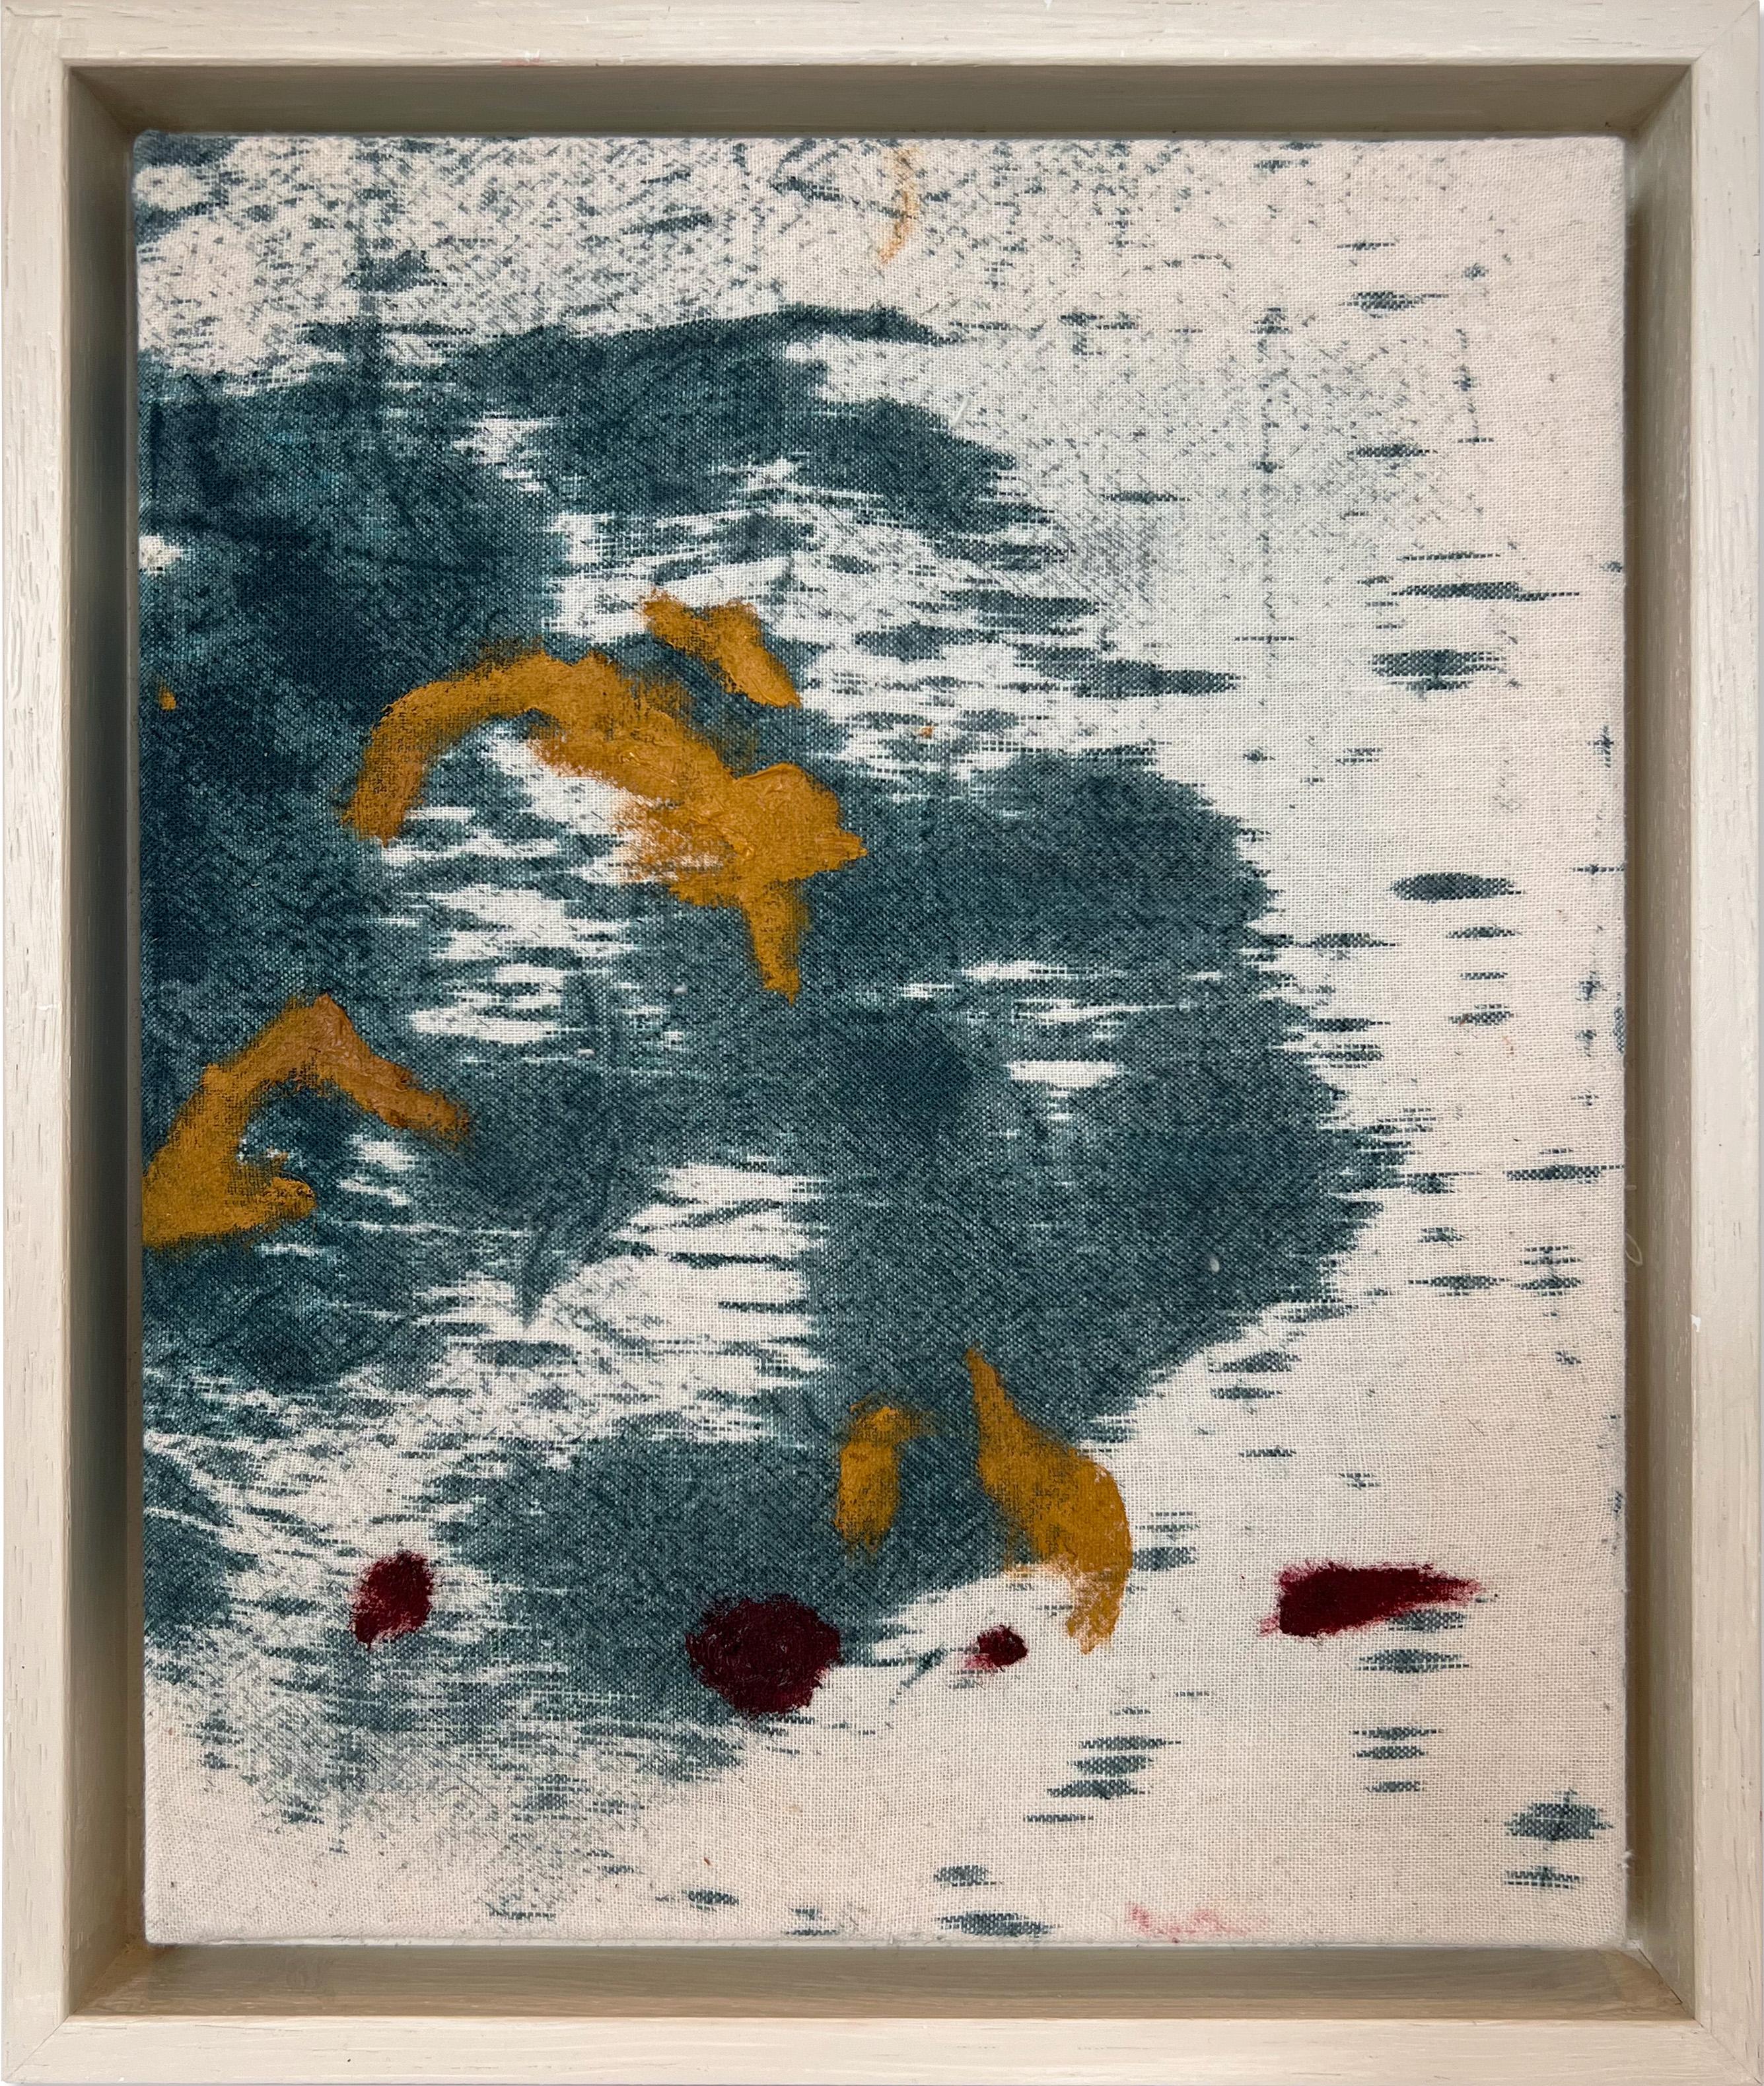 "Day Remains I" (abstract, blue dye, deep red, yellow, framed painting, cotton)